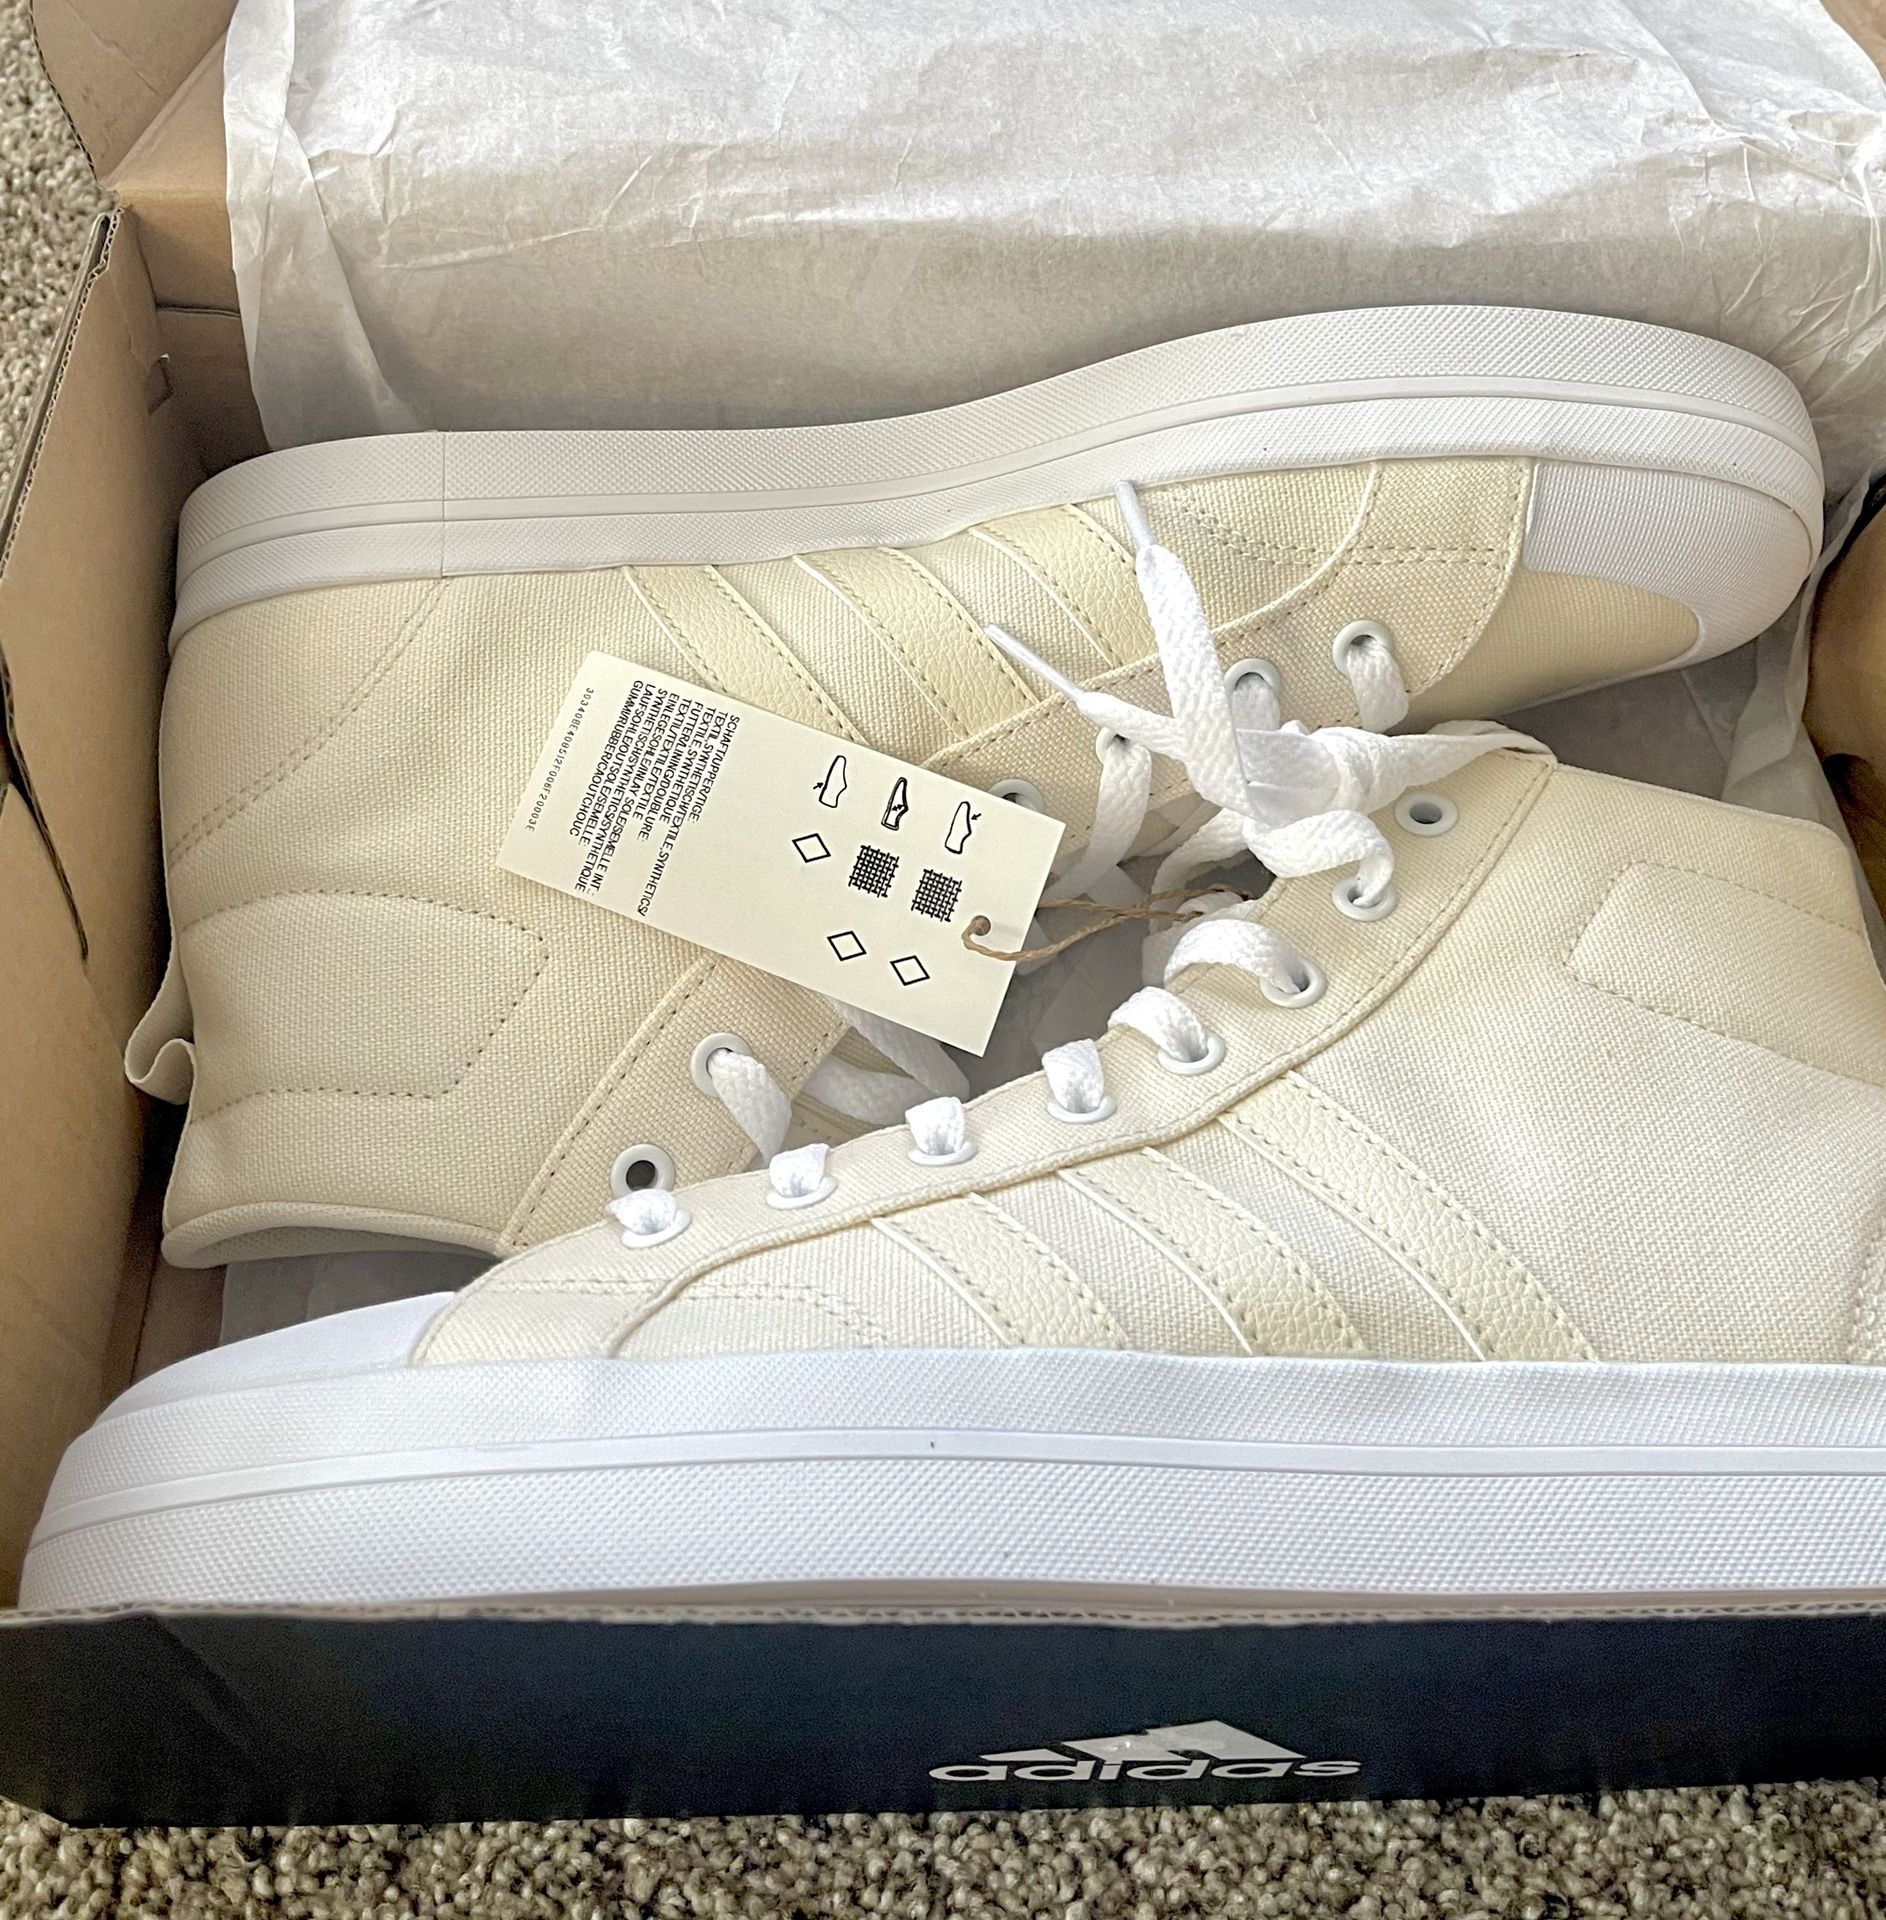 NEW Adidas High Tops, Sneakers, Shoes, Skateboard Style, 